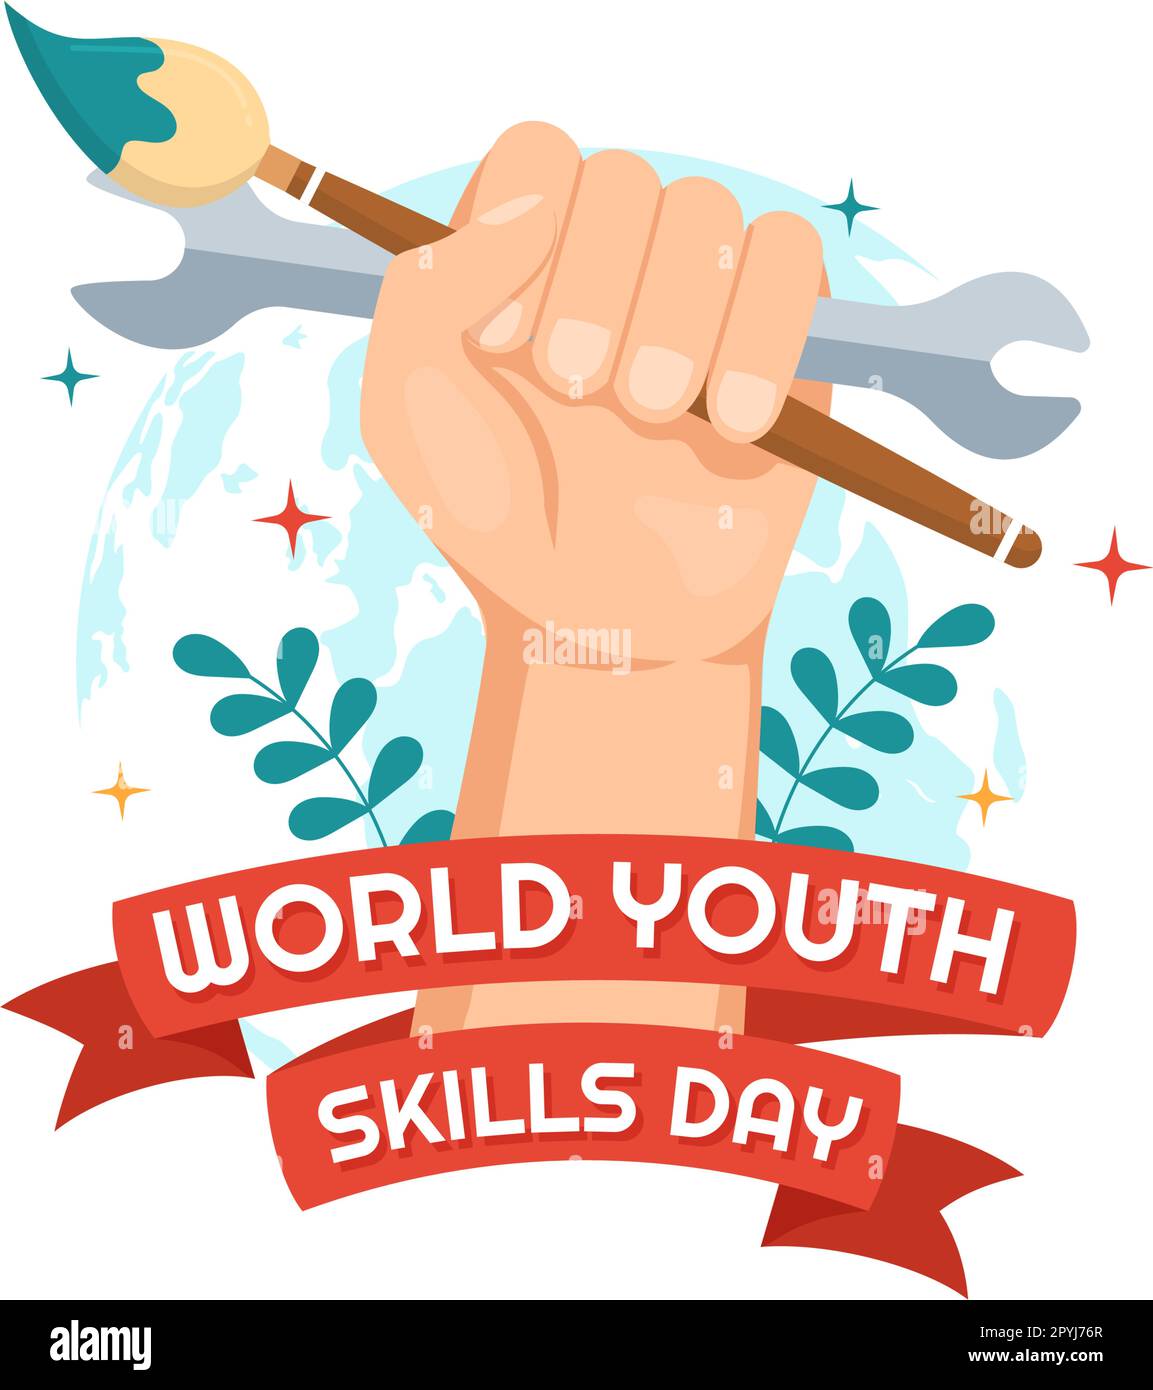 World Youth Skills Day Vector Illustration of People with Skill for Various Employment and Entrepreneurship in Flat Cartoon Hand Drawn Templates Stock Vector